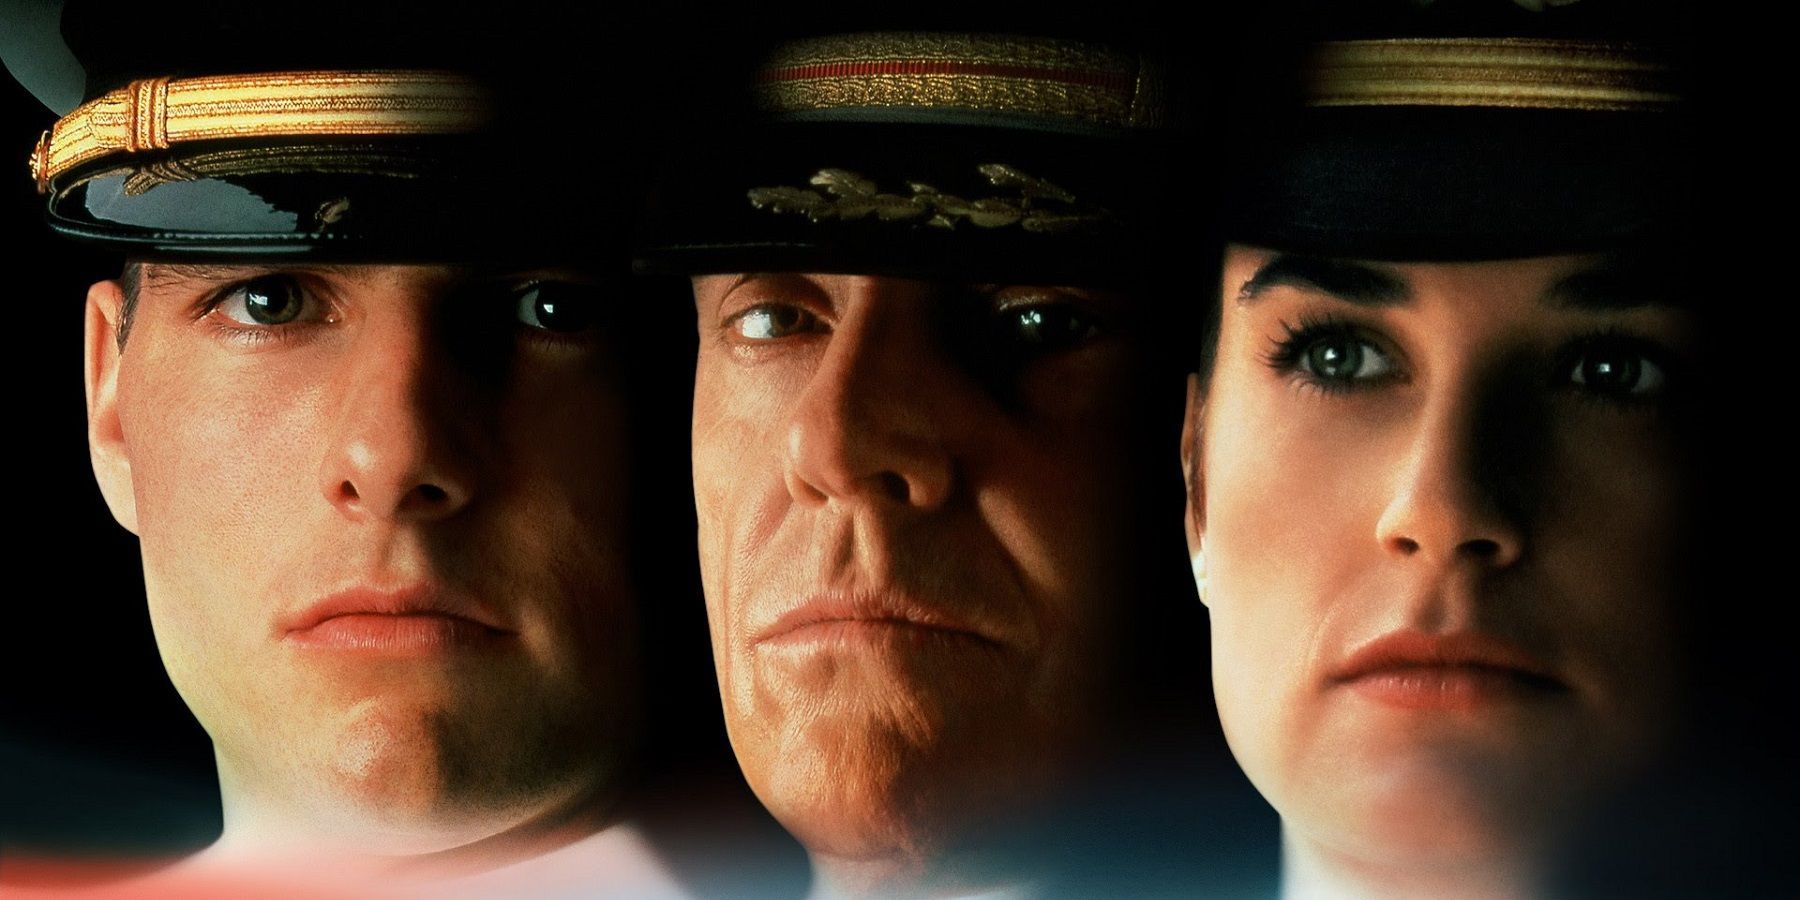 The cast of A Few Good Men appear on the poster for the film 